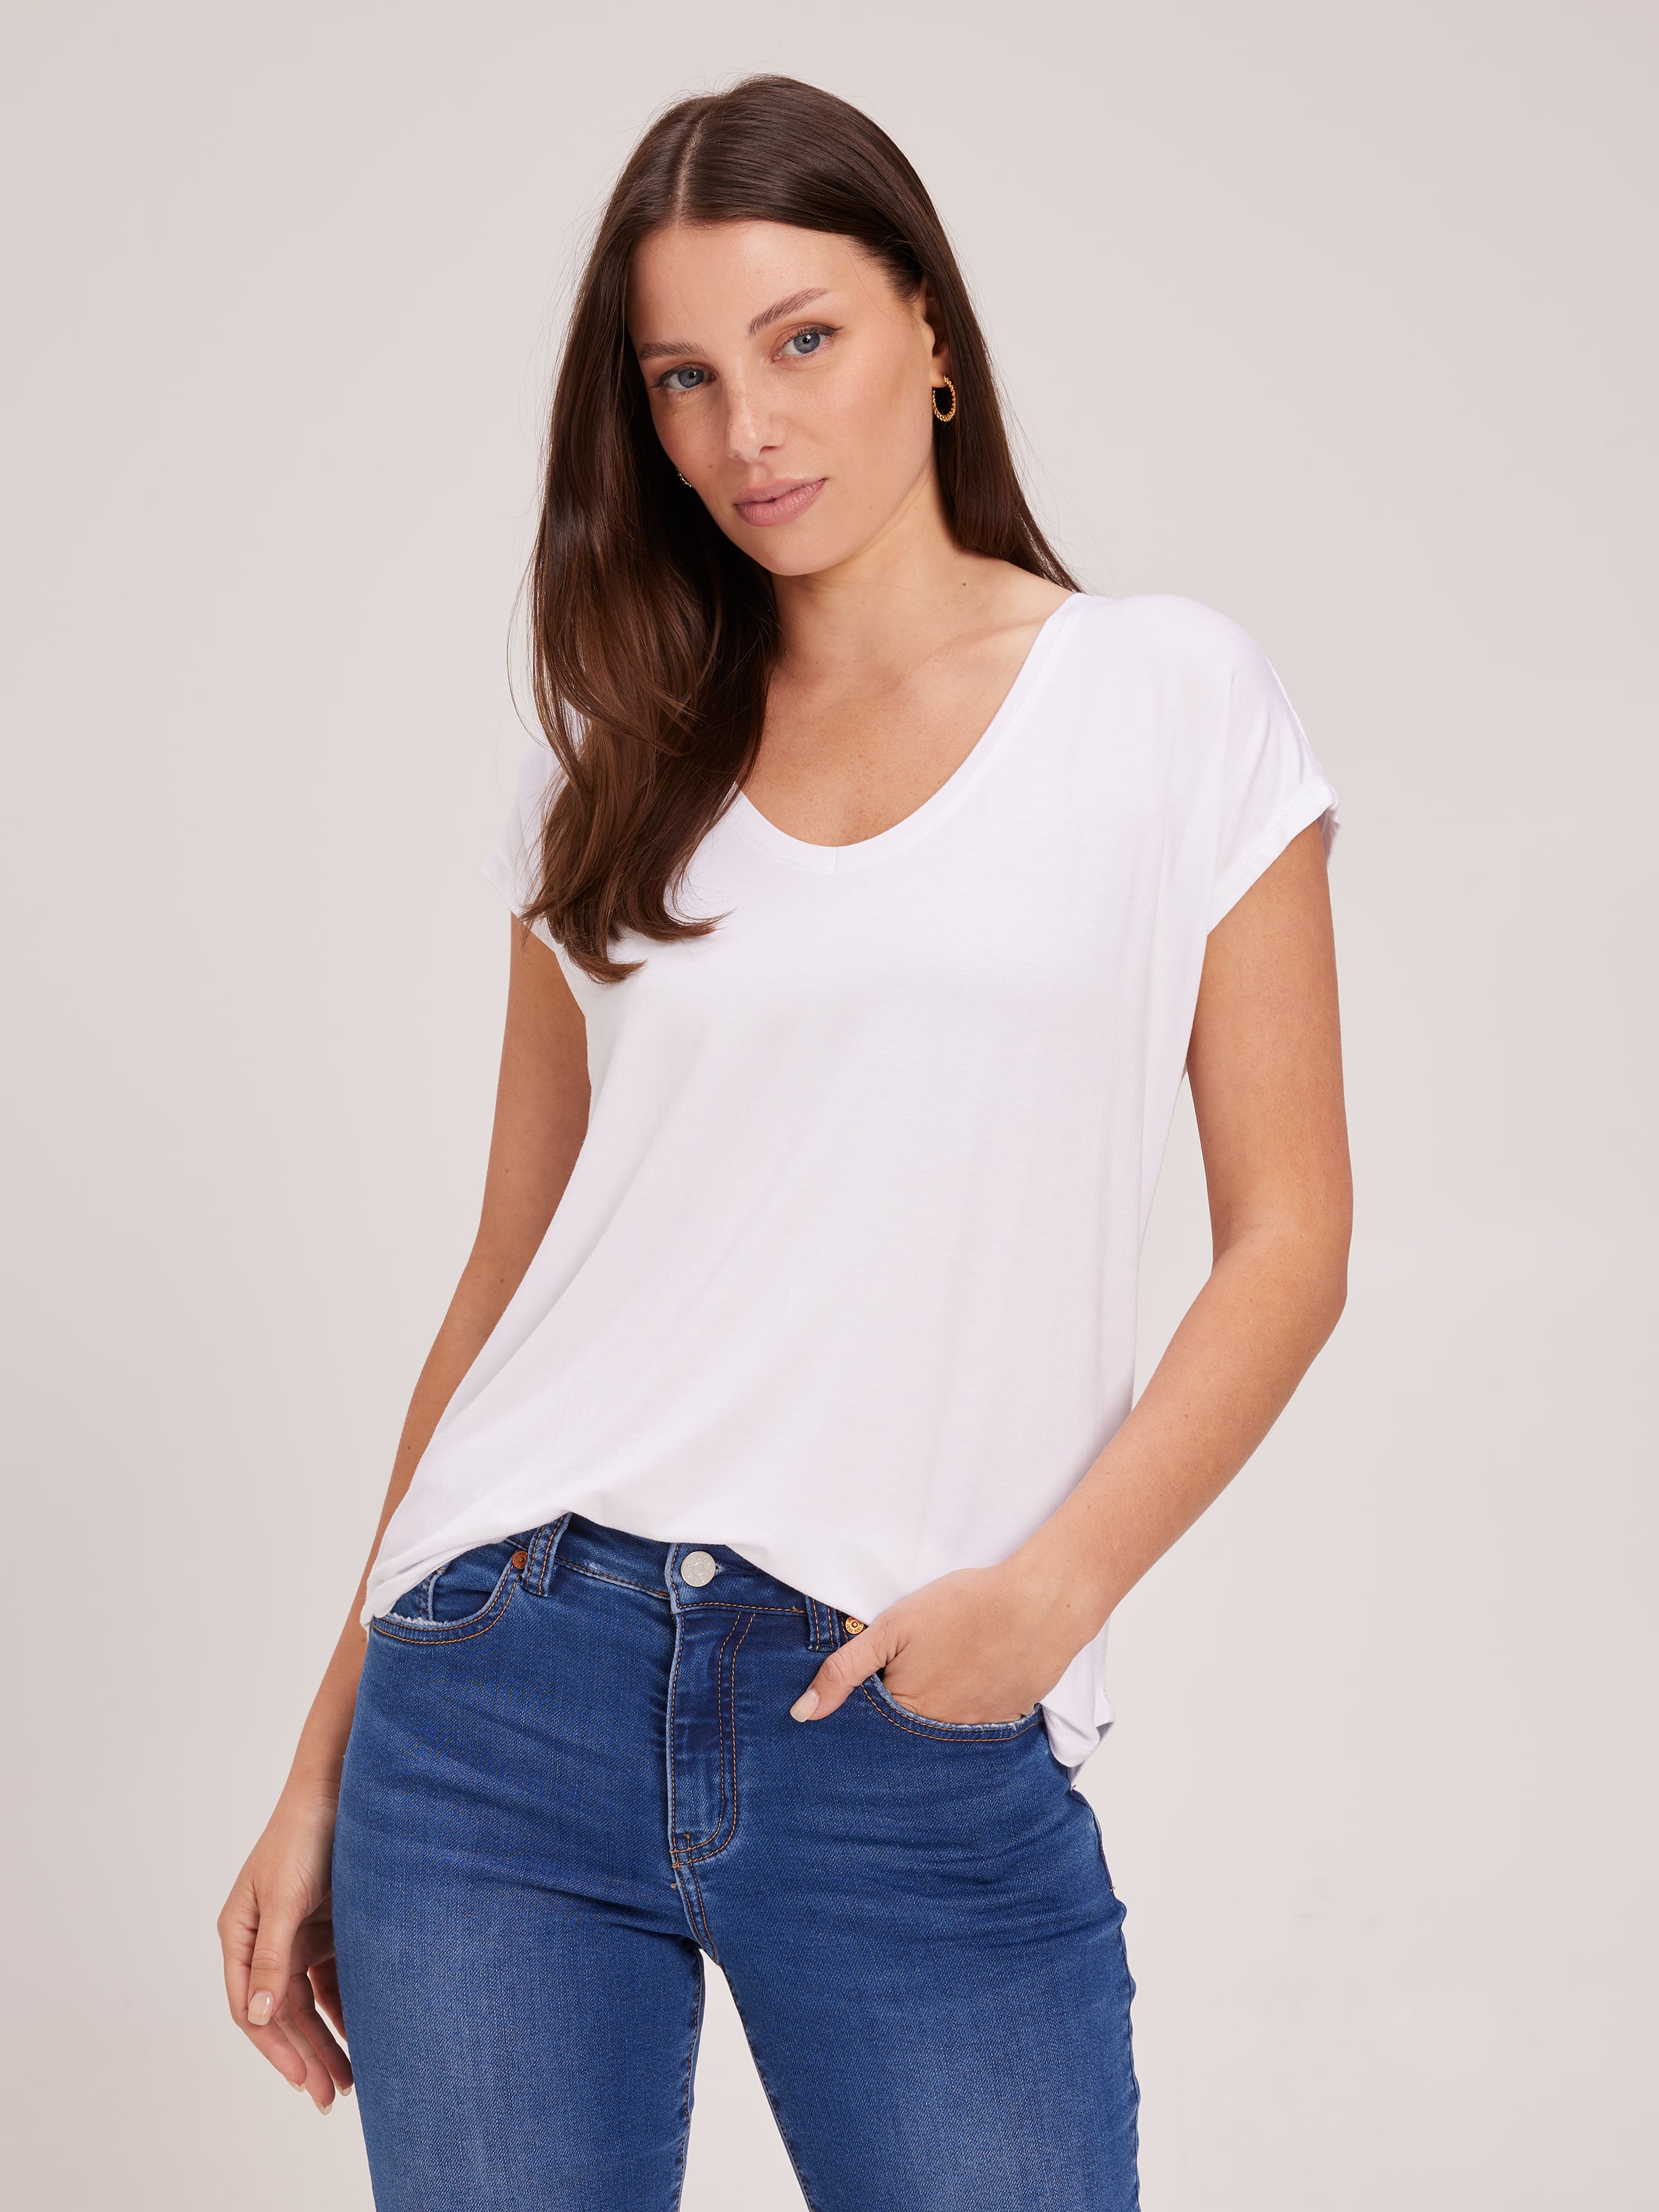 Short Sleeve Luxe T-shirt  Clothes for women, Jumpers for women, Womens  tops